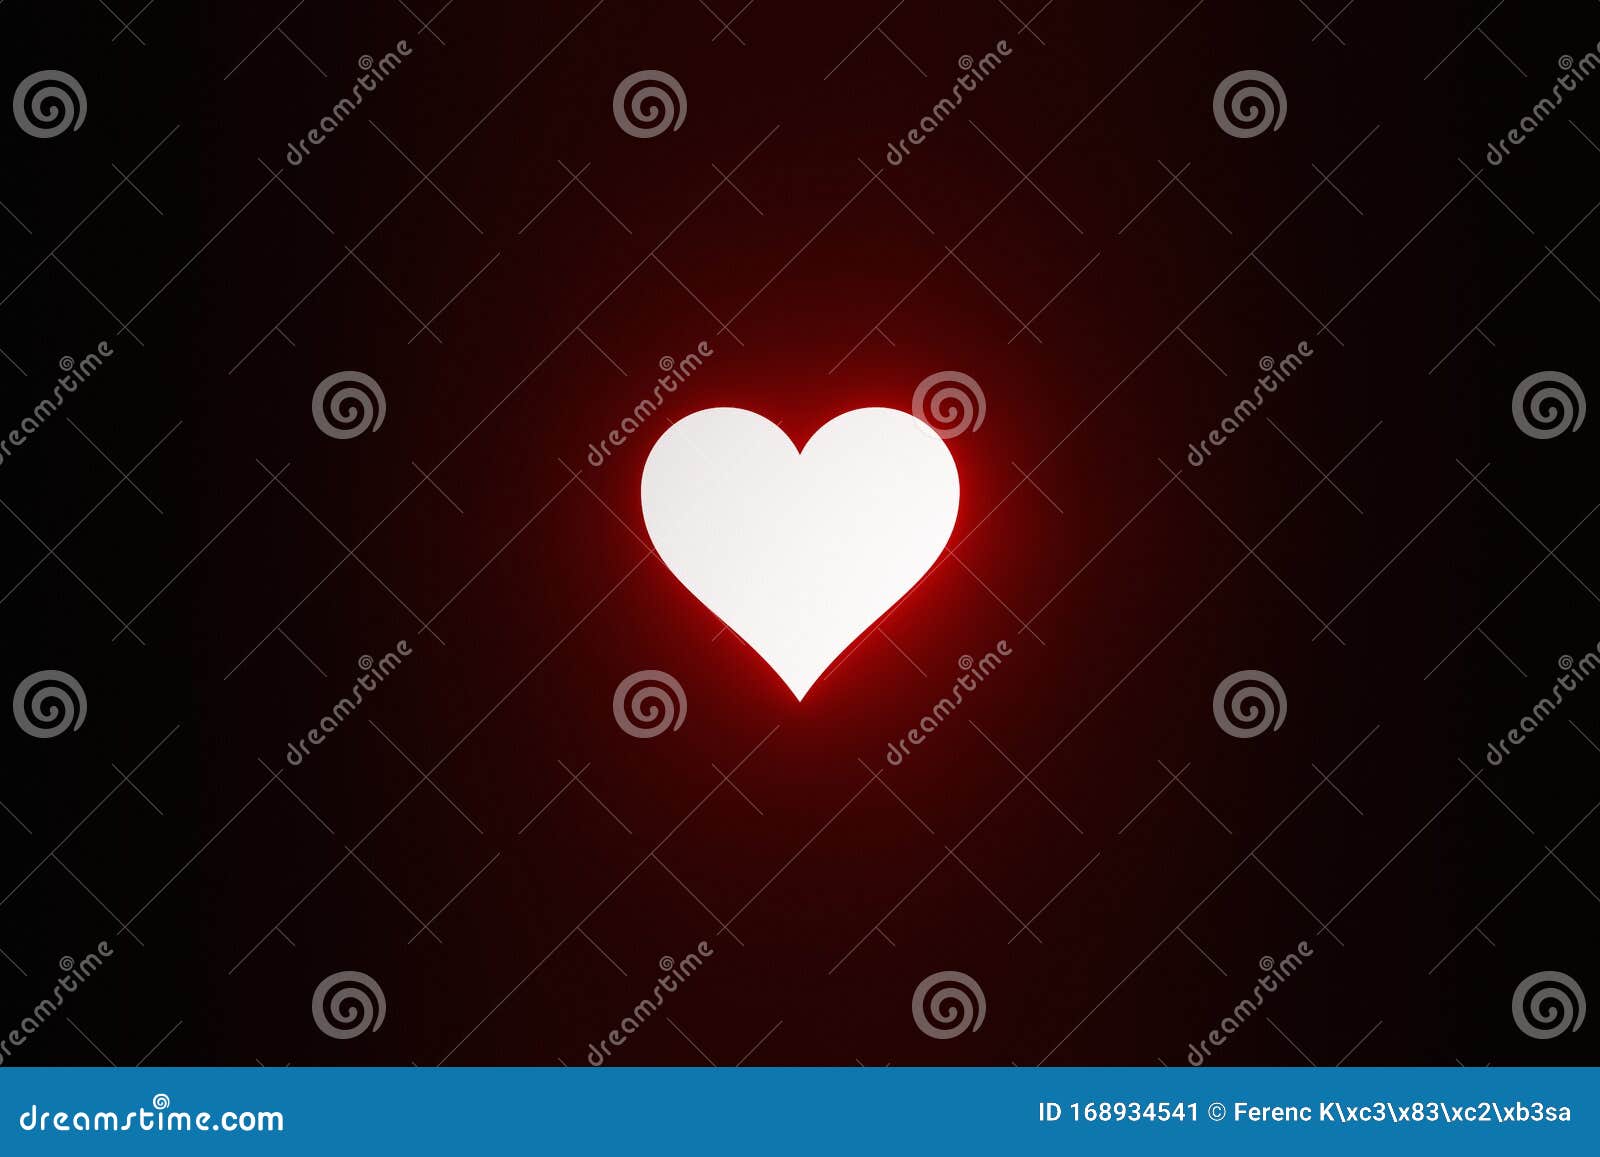 46800 Glowing Heart Stock Photos Pictures  RoyaltyFree Images  iStock   Glowing heart frame